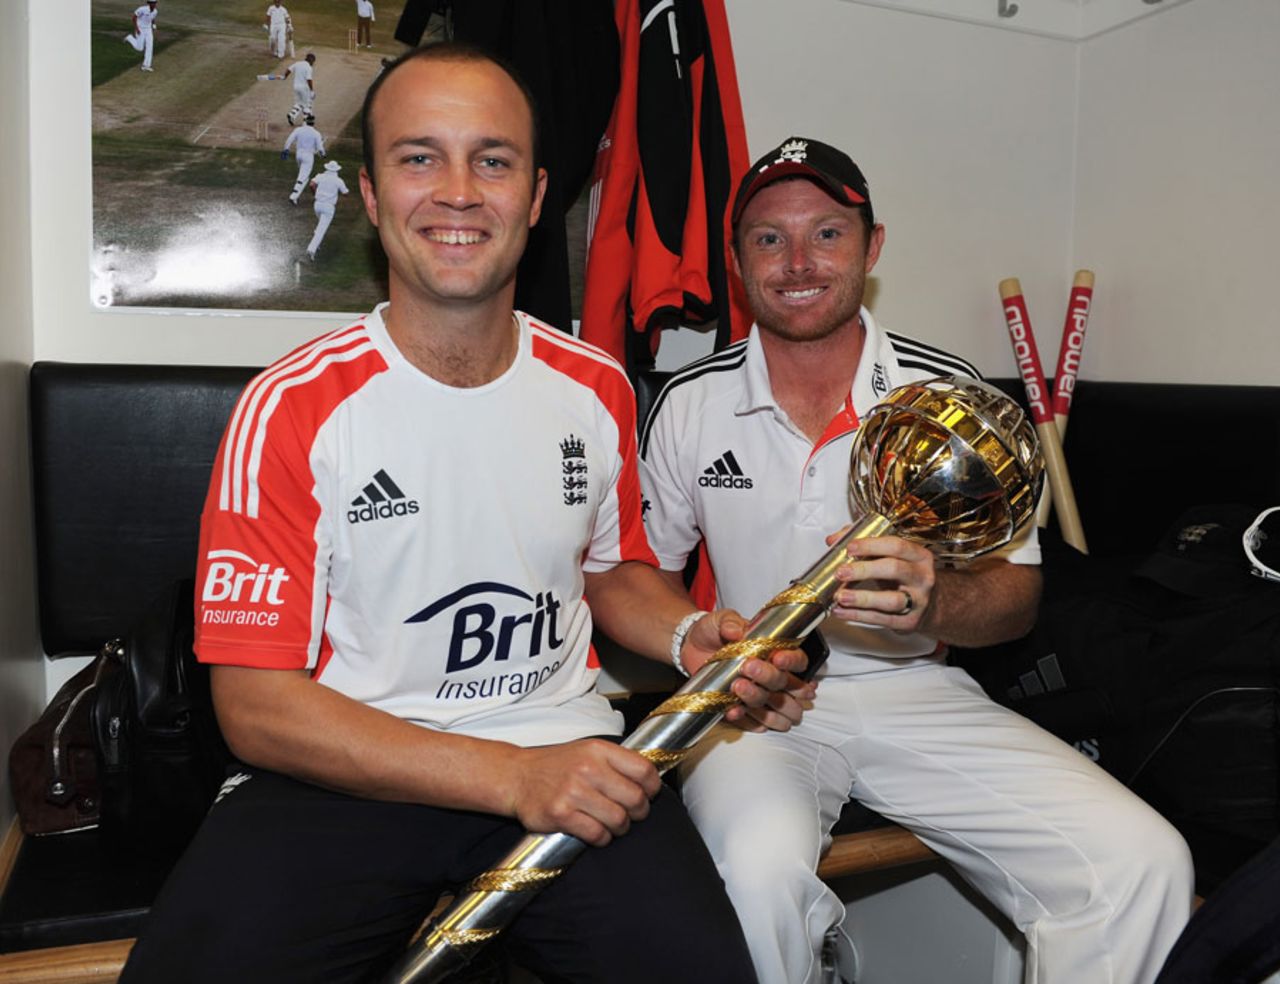 Jonathan Trott and Ian Bell get their hands on the mace, England v India, 4th Test, The Oval, 5th day, August 22, 2011